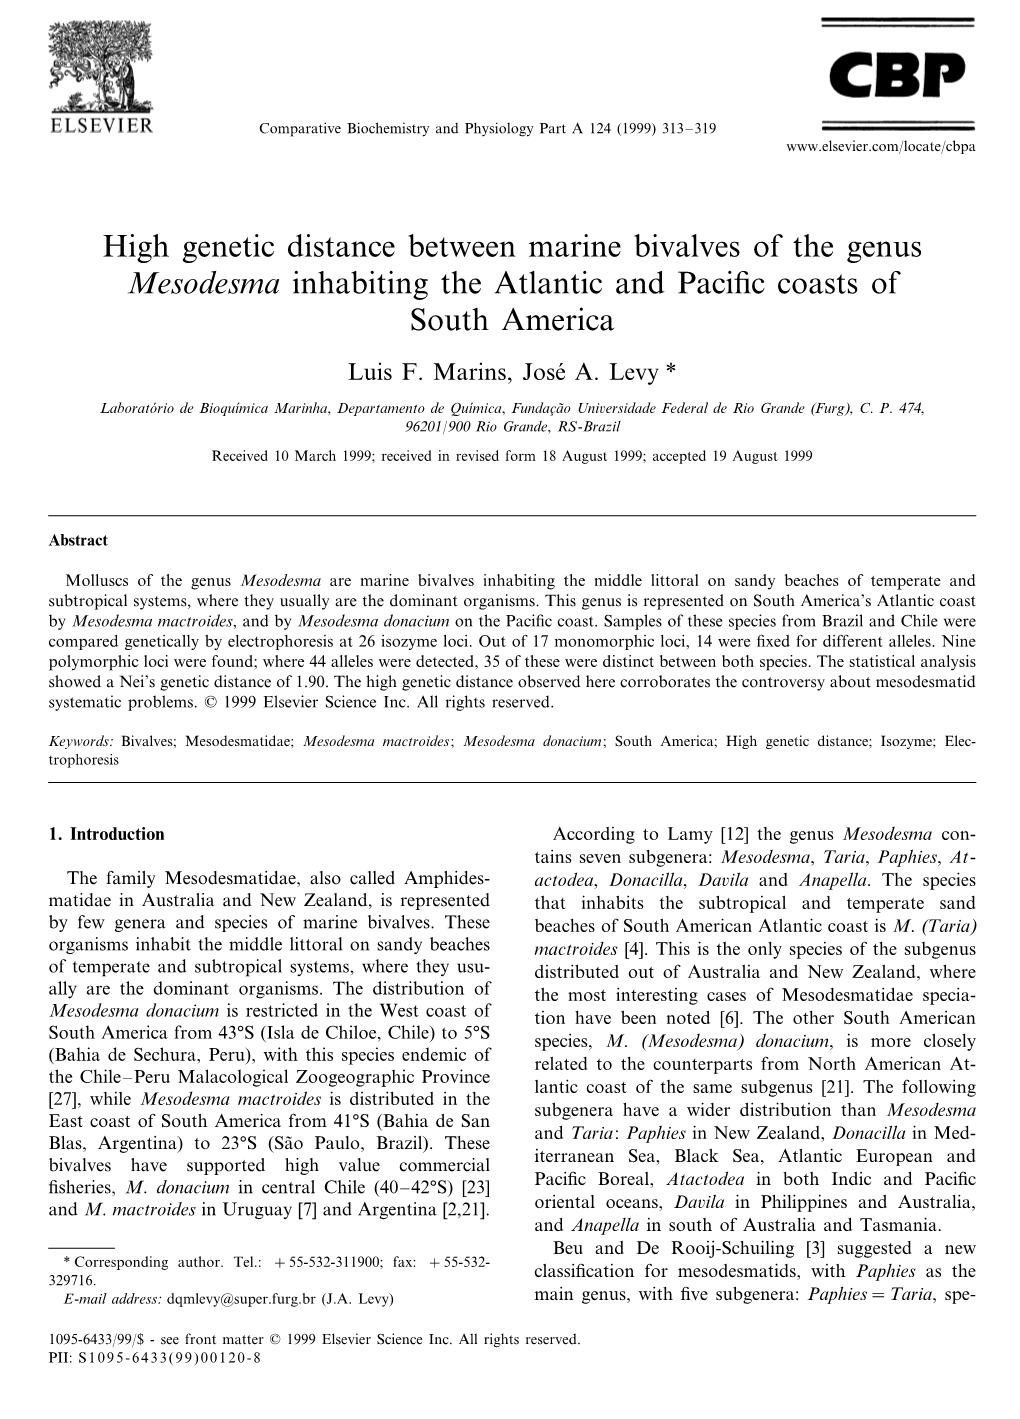 High Genetic Distance Between Marine Bivalves of the Genus Mesodesma Inhabiting the Atlantic and Paciﬁc Coasts of South America